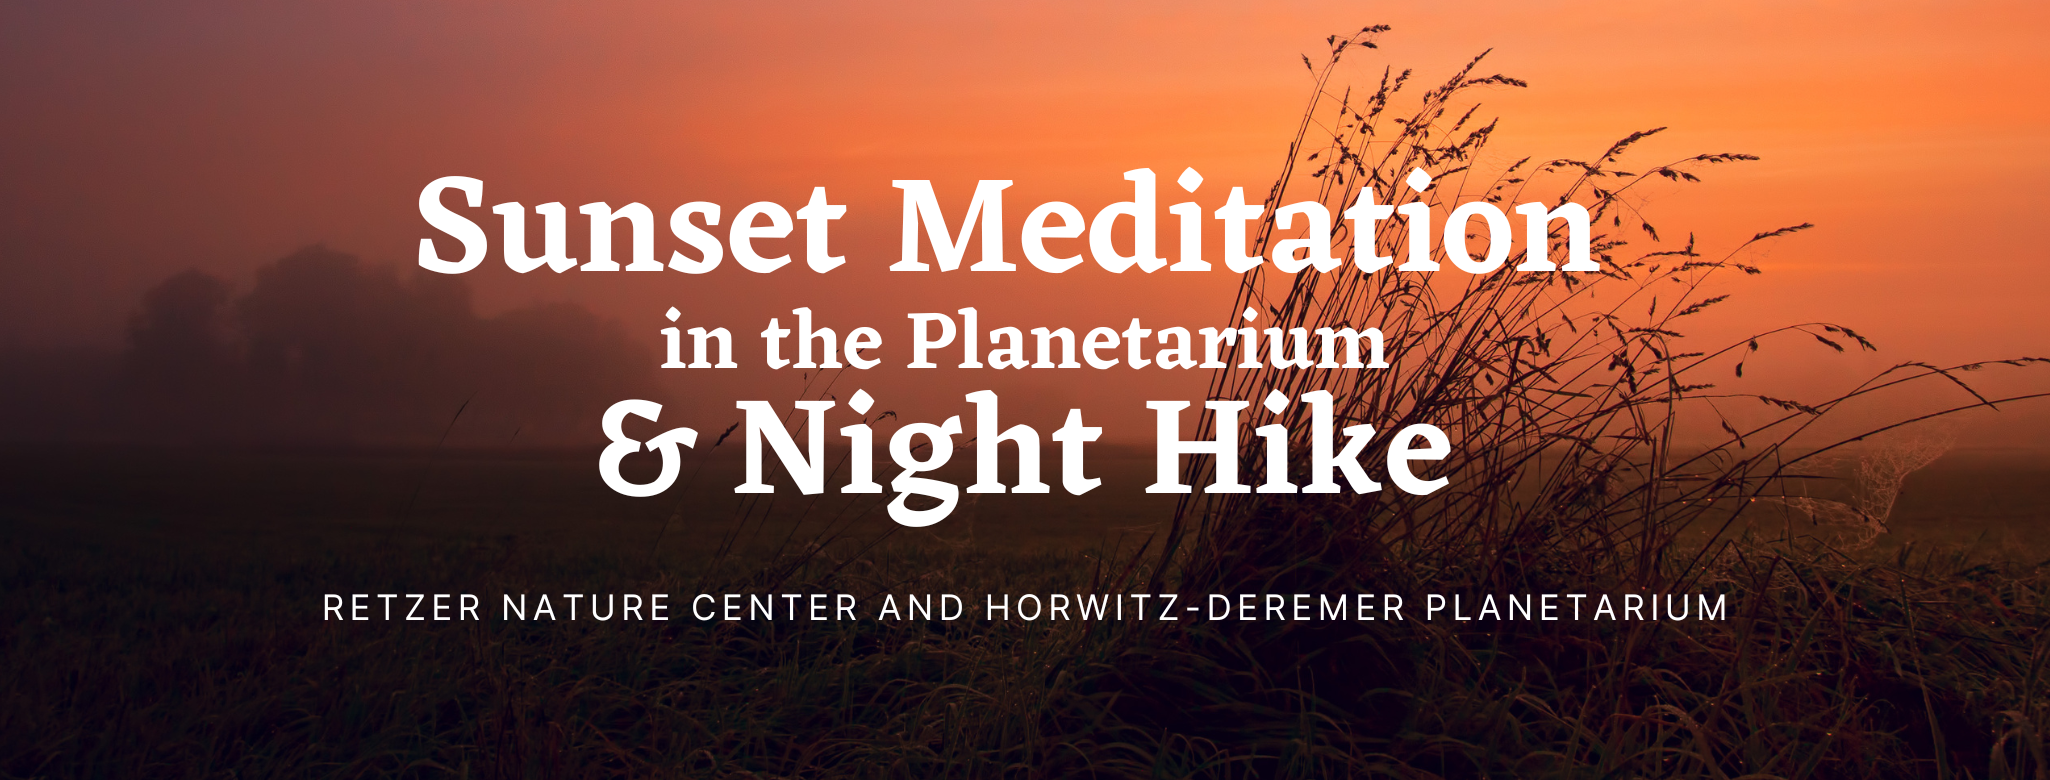 Sunset over Retzer Nature Center grounds - meditate in the planetarium then enjoy a night hike